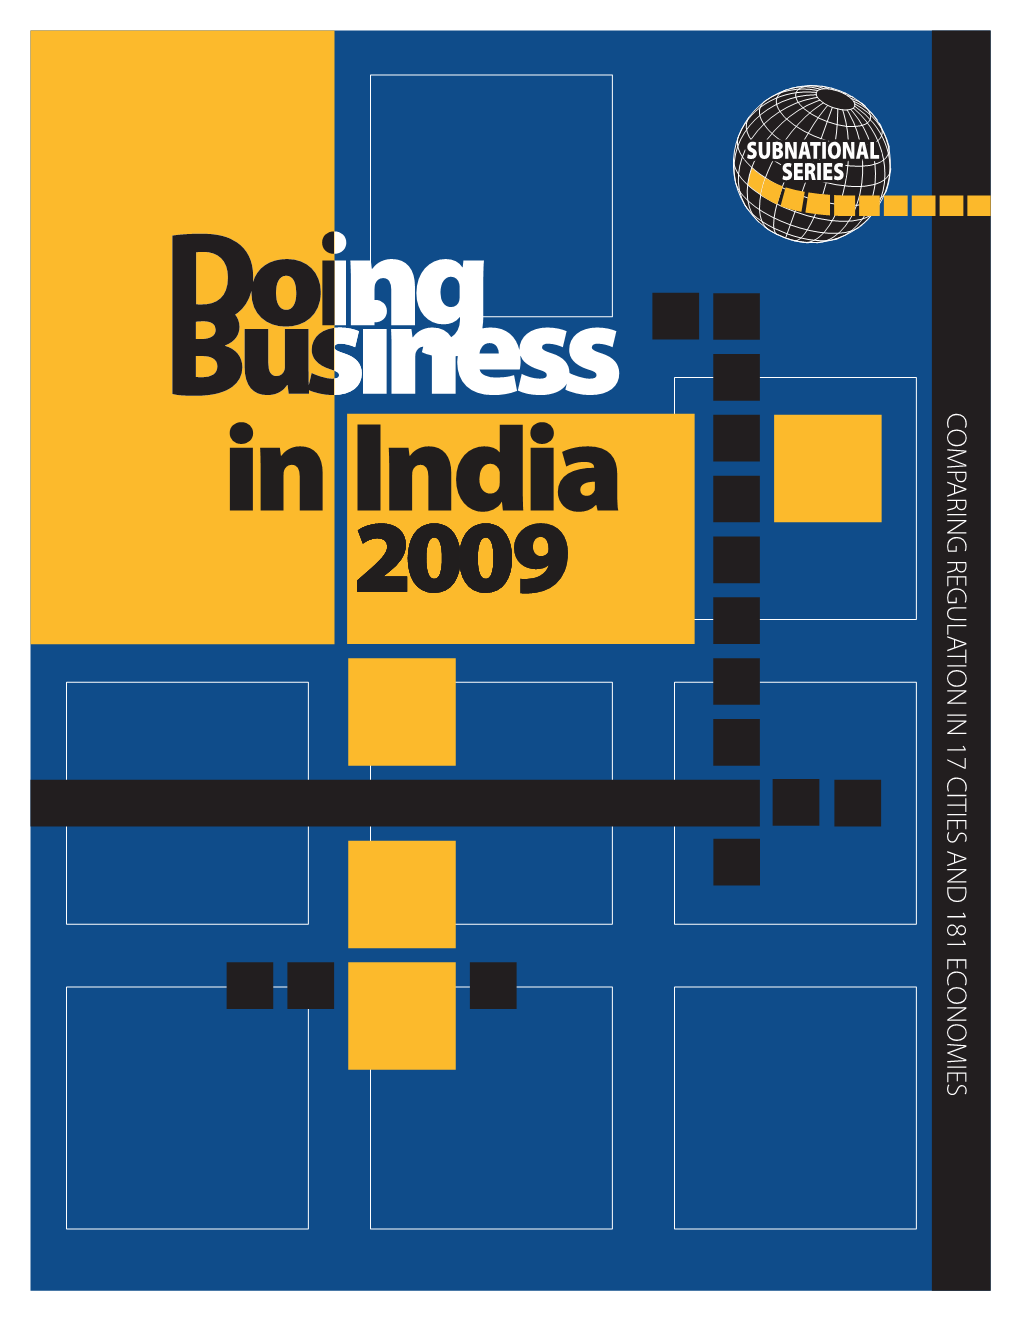 Doing Business in India 2009 and Other Subnational and Regional Doing Business Studies Can Be Downloaded at No Charge At